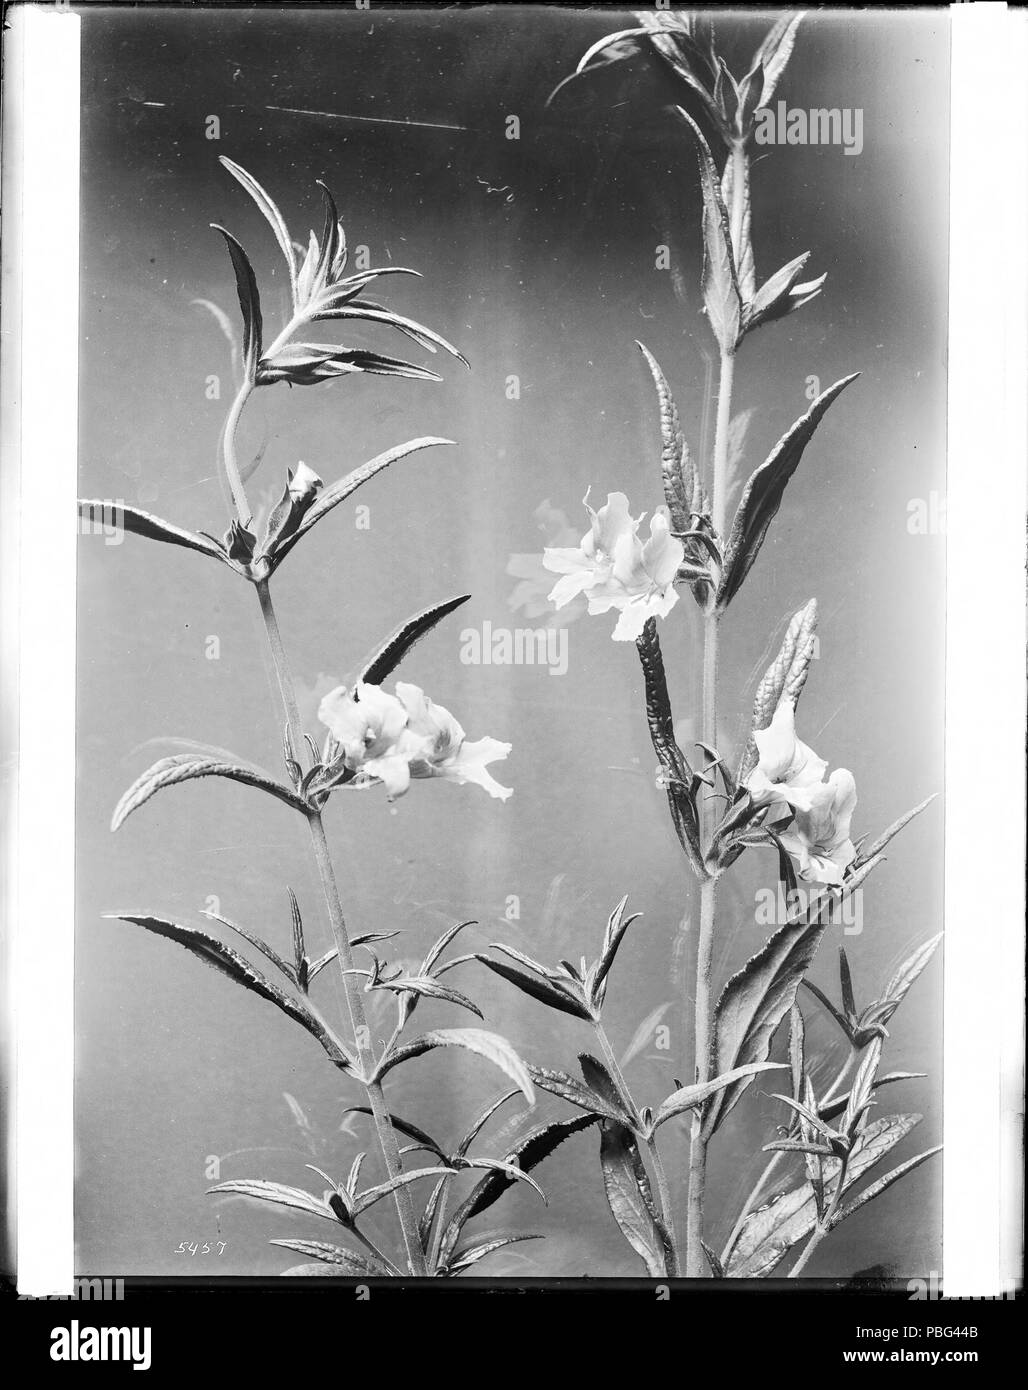 . English: Specimen of Mimulus glutiniosus, a wild flower, ca.1920 Photograph of a specimen of Mimulus glutiniosus, a wild flower, ca.1920. On dark background.; 'These hardy and tender herbs are natives of the Americas, Australia, Africa and Asia. They form clumps, 8 to 10 inches high and have heart-shaped to oblong-lanceolate leaves, 3 to 6 inches long. Their flowers are pouched, 1 to 2 inches across and may be cream, red, rose, yellow, or wine and are often marked with a contrasting color. M. cupreus is a perennial that grows 6 to 9 inches tall. In the regions where it is hardy, it is great  Stock Photo